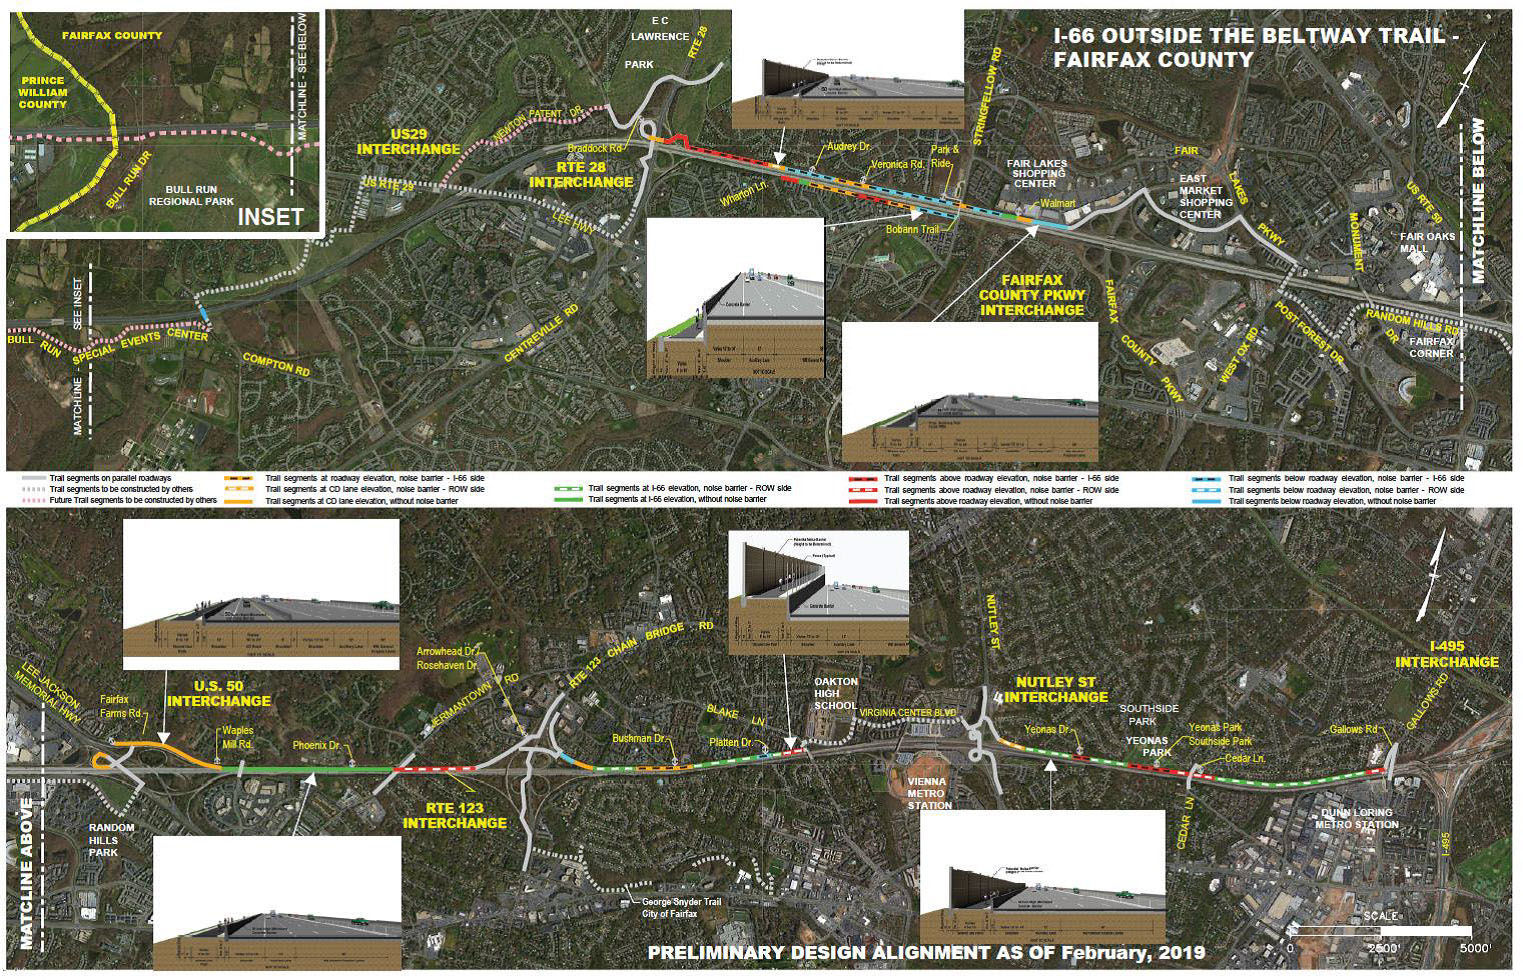 The layouts and path of parts of the proposed trail. (Courtesy VDOT/FAM)